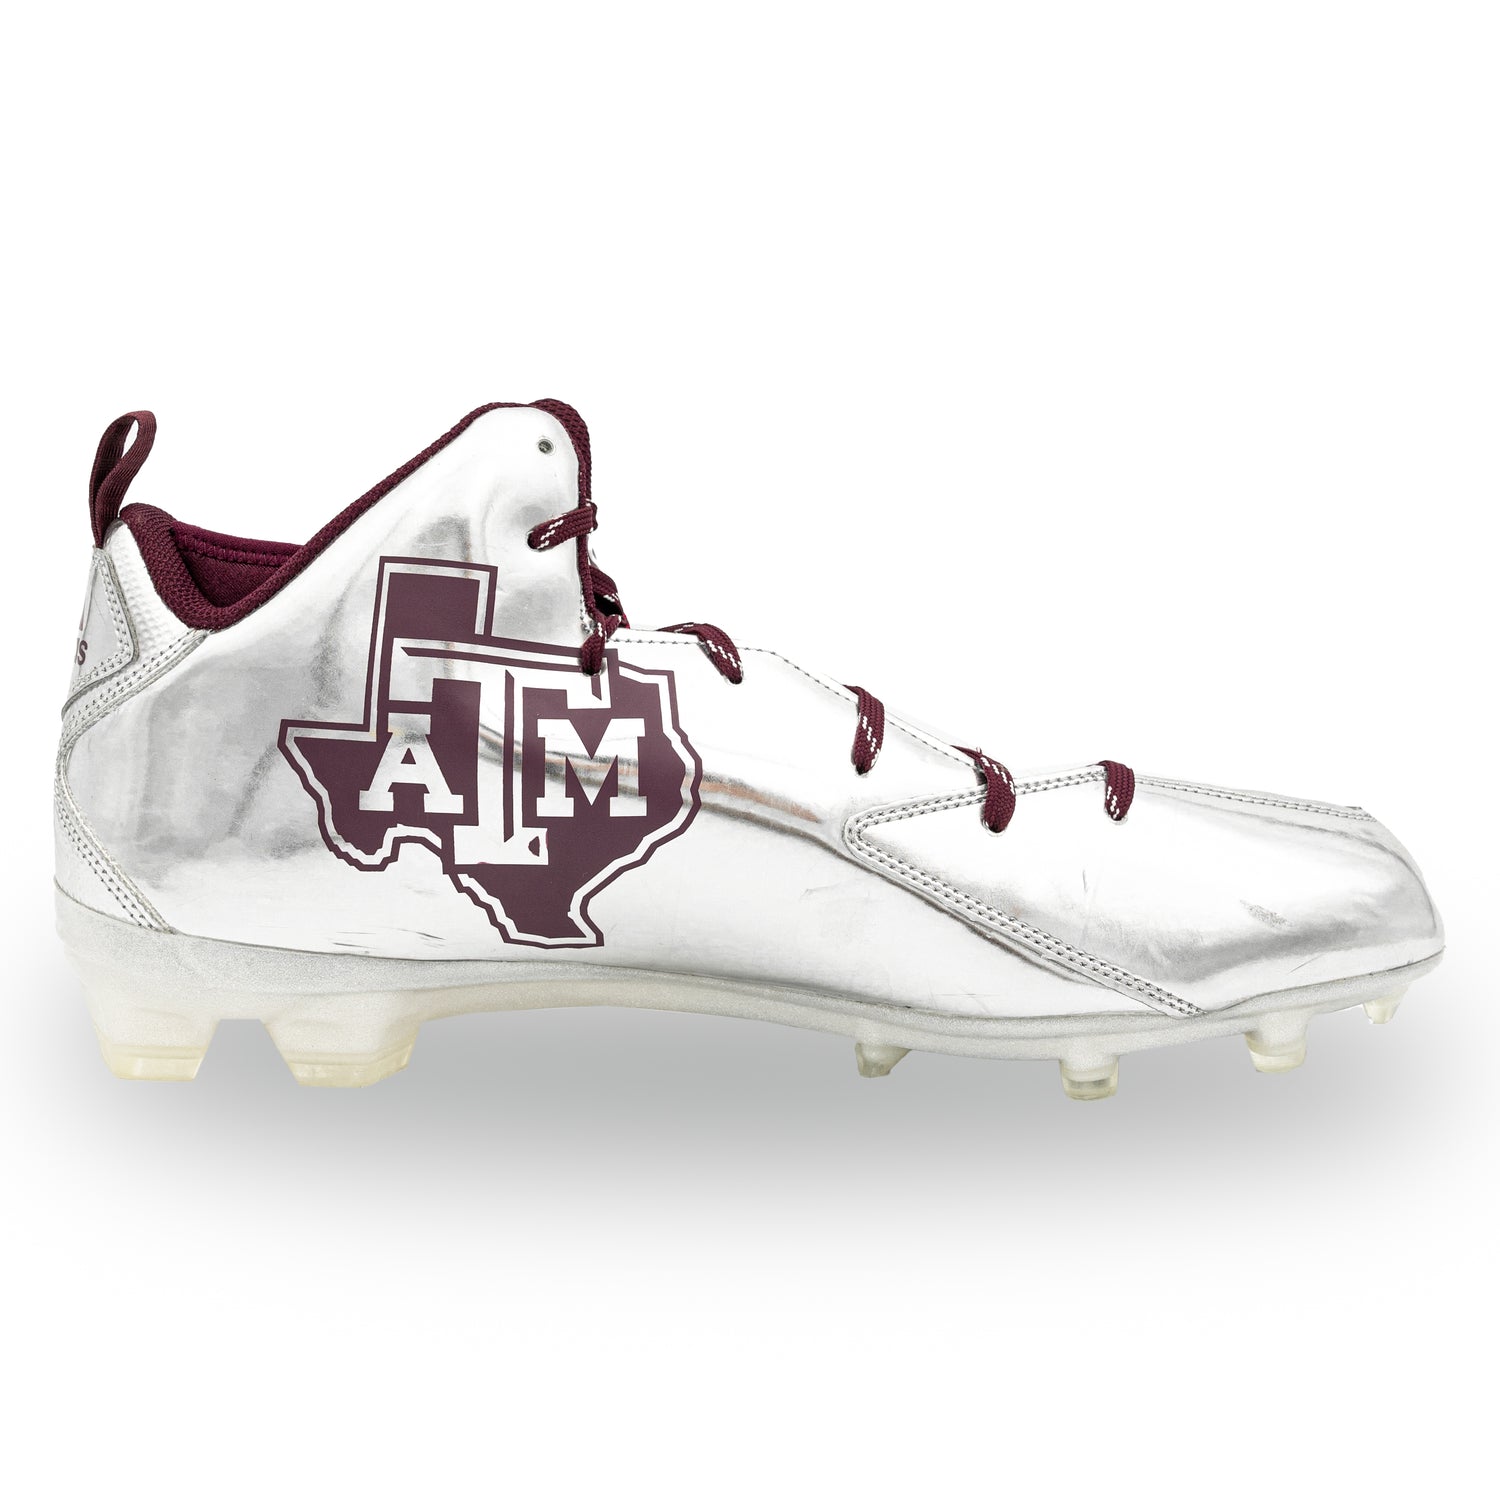 Texas A&M Collectible Adidas Lonestar Chrome & Maroon Cleats